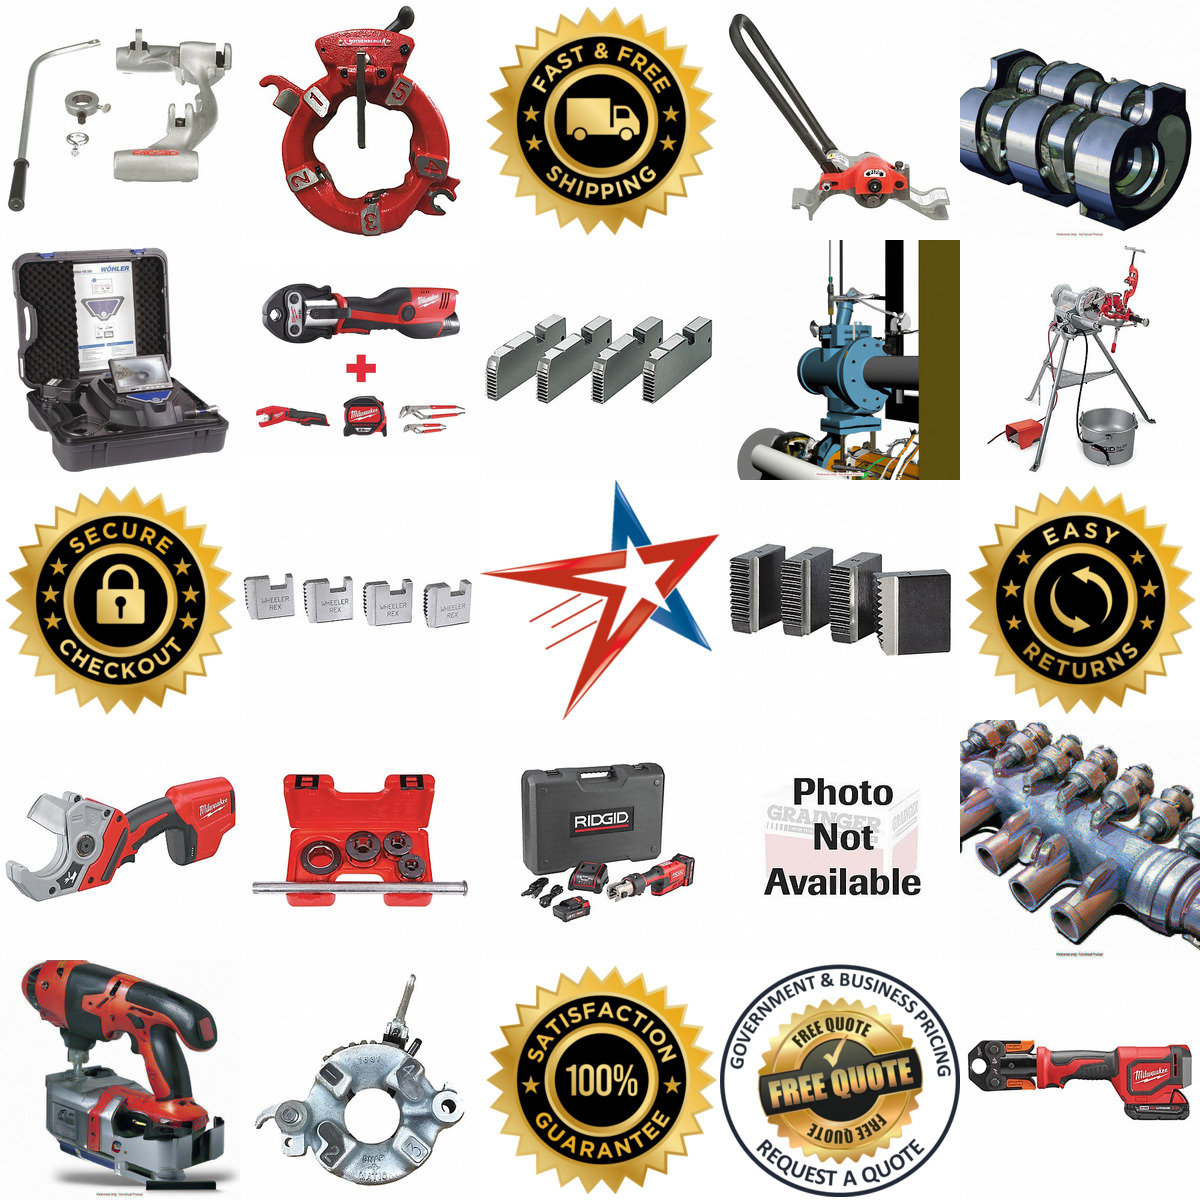 A selection of Plumbing Power Tools products on GoVets